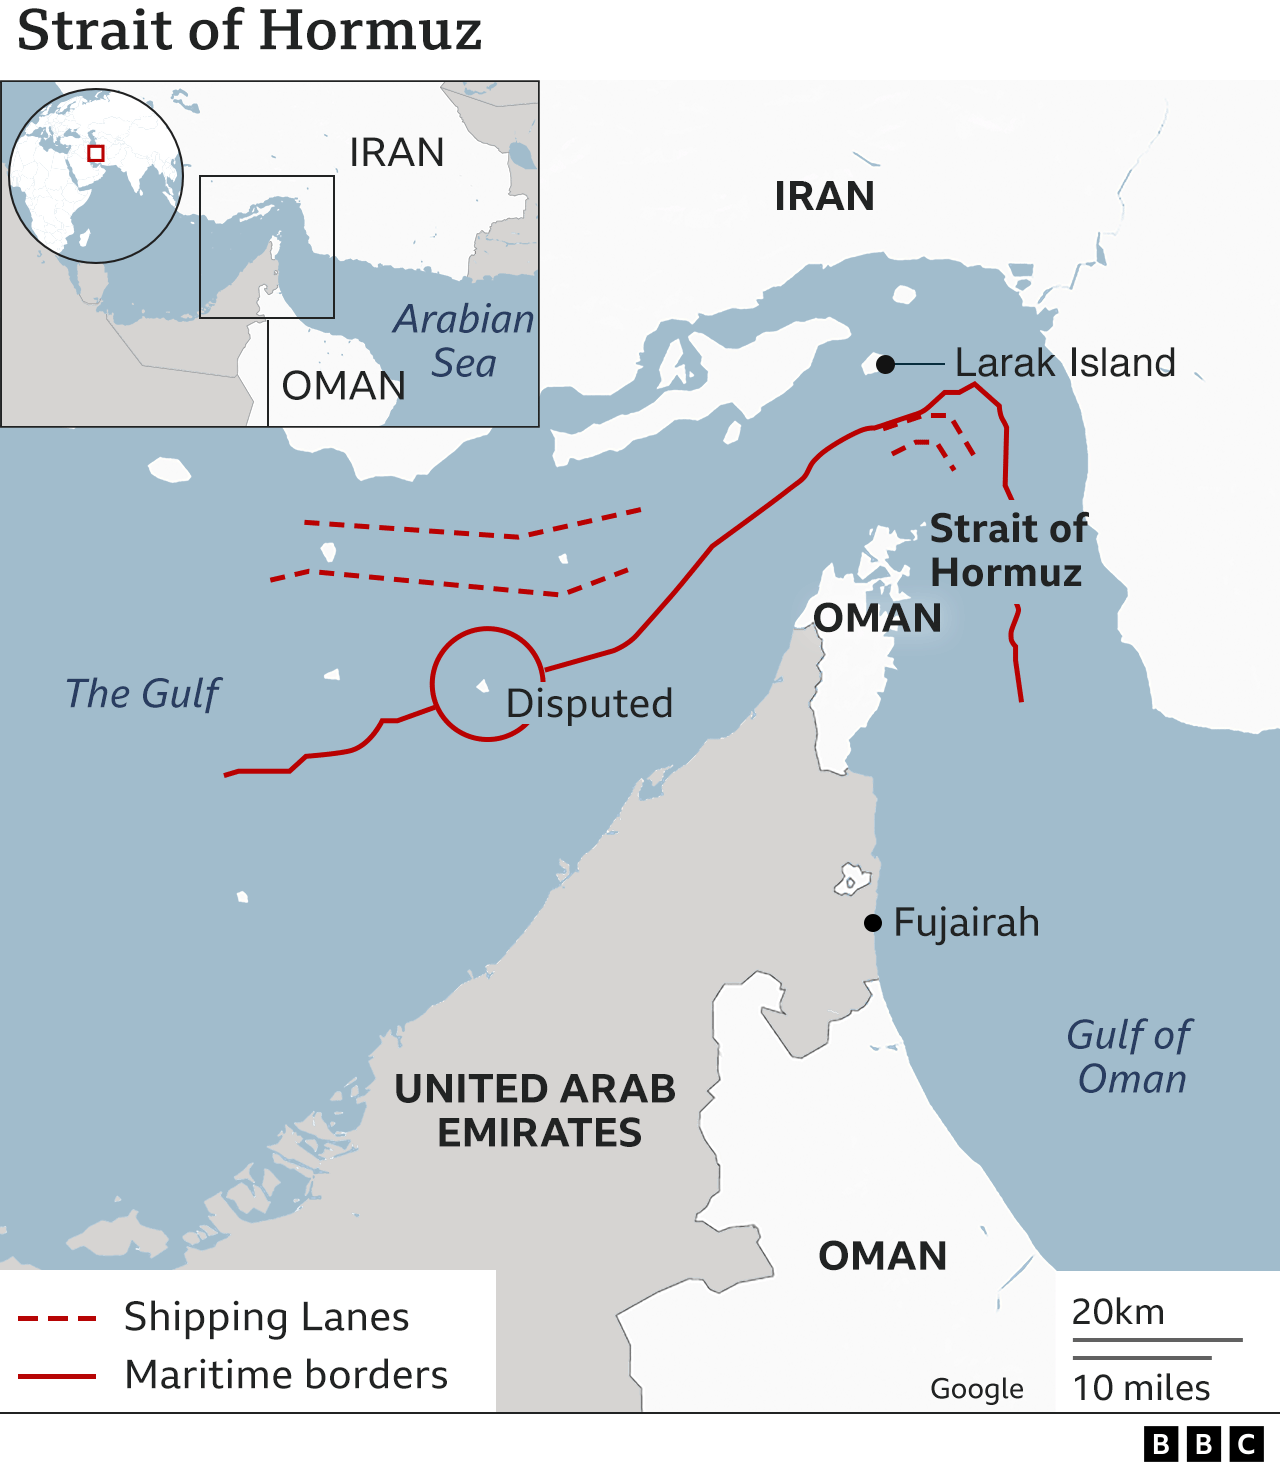 Map showing the maritime borders around the Strait of Hormuz.